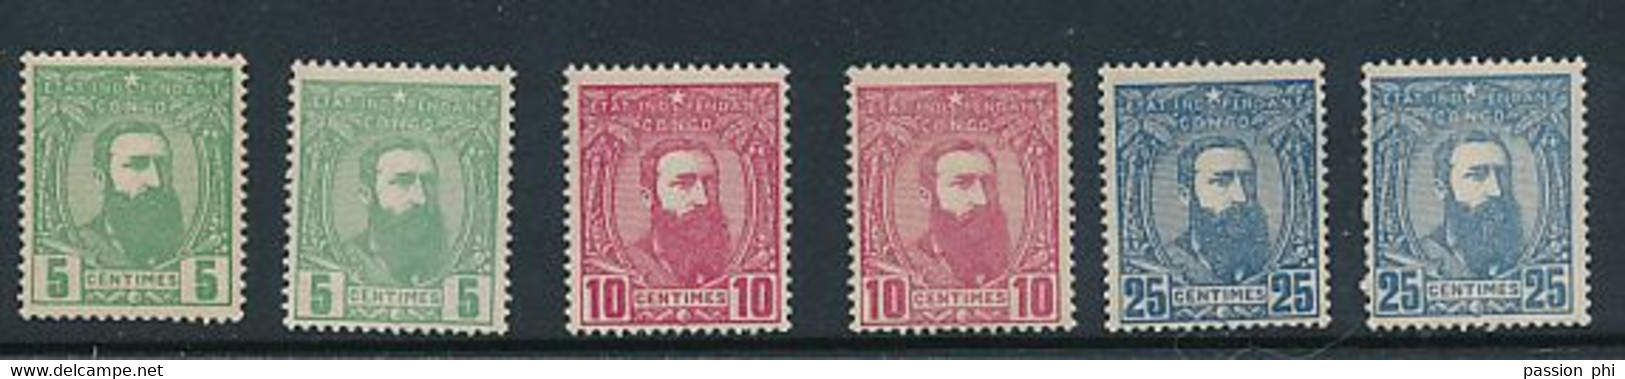 ZZ BELGIAN CONGO 1887 ISSUE SELECTION MNH - 1884-1894